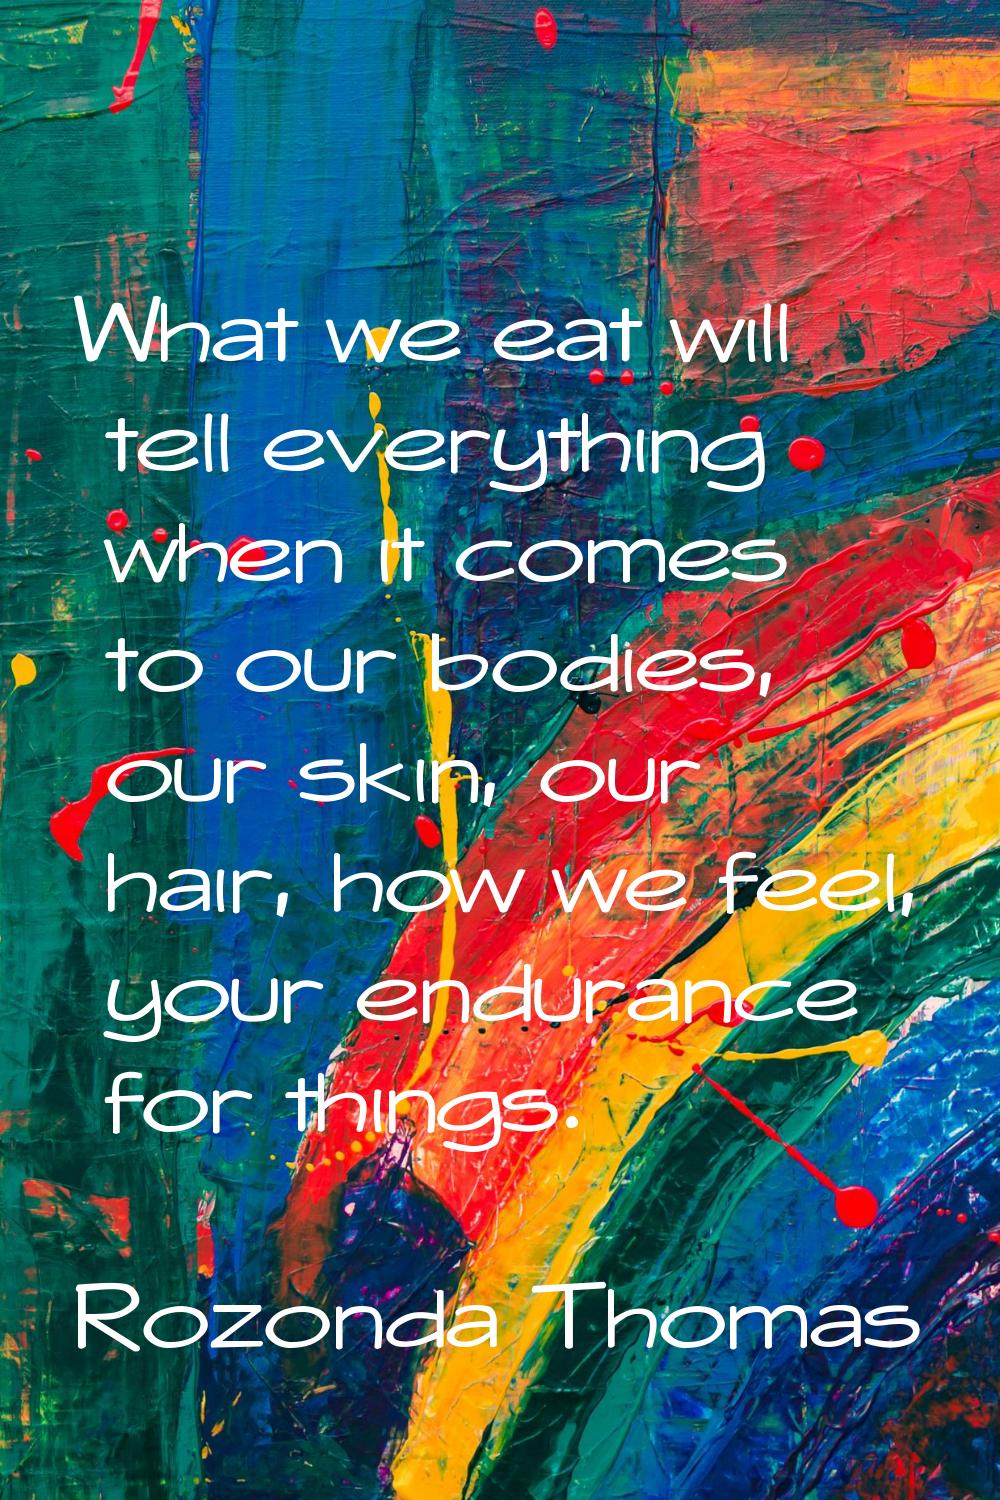 What we eat will tell everything when it comes to our bodies, our skin, our hair, how we feel, your